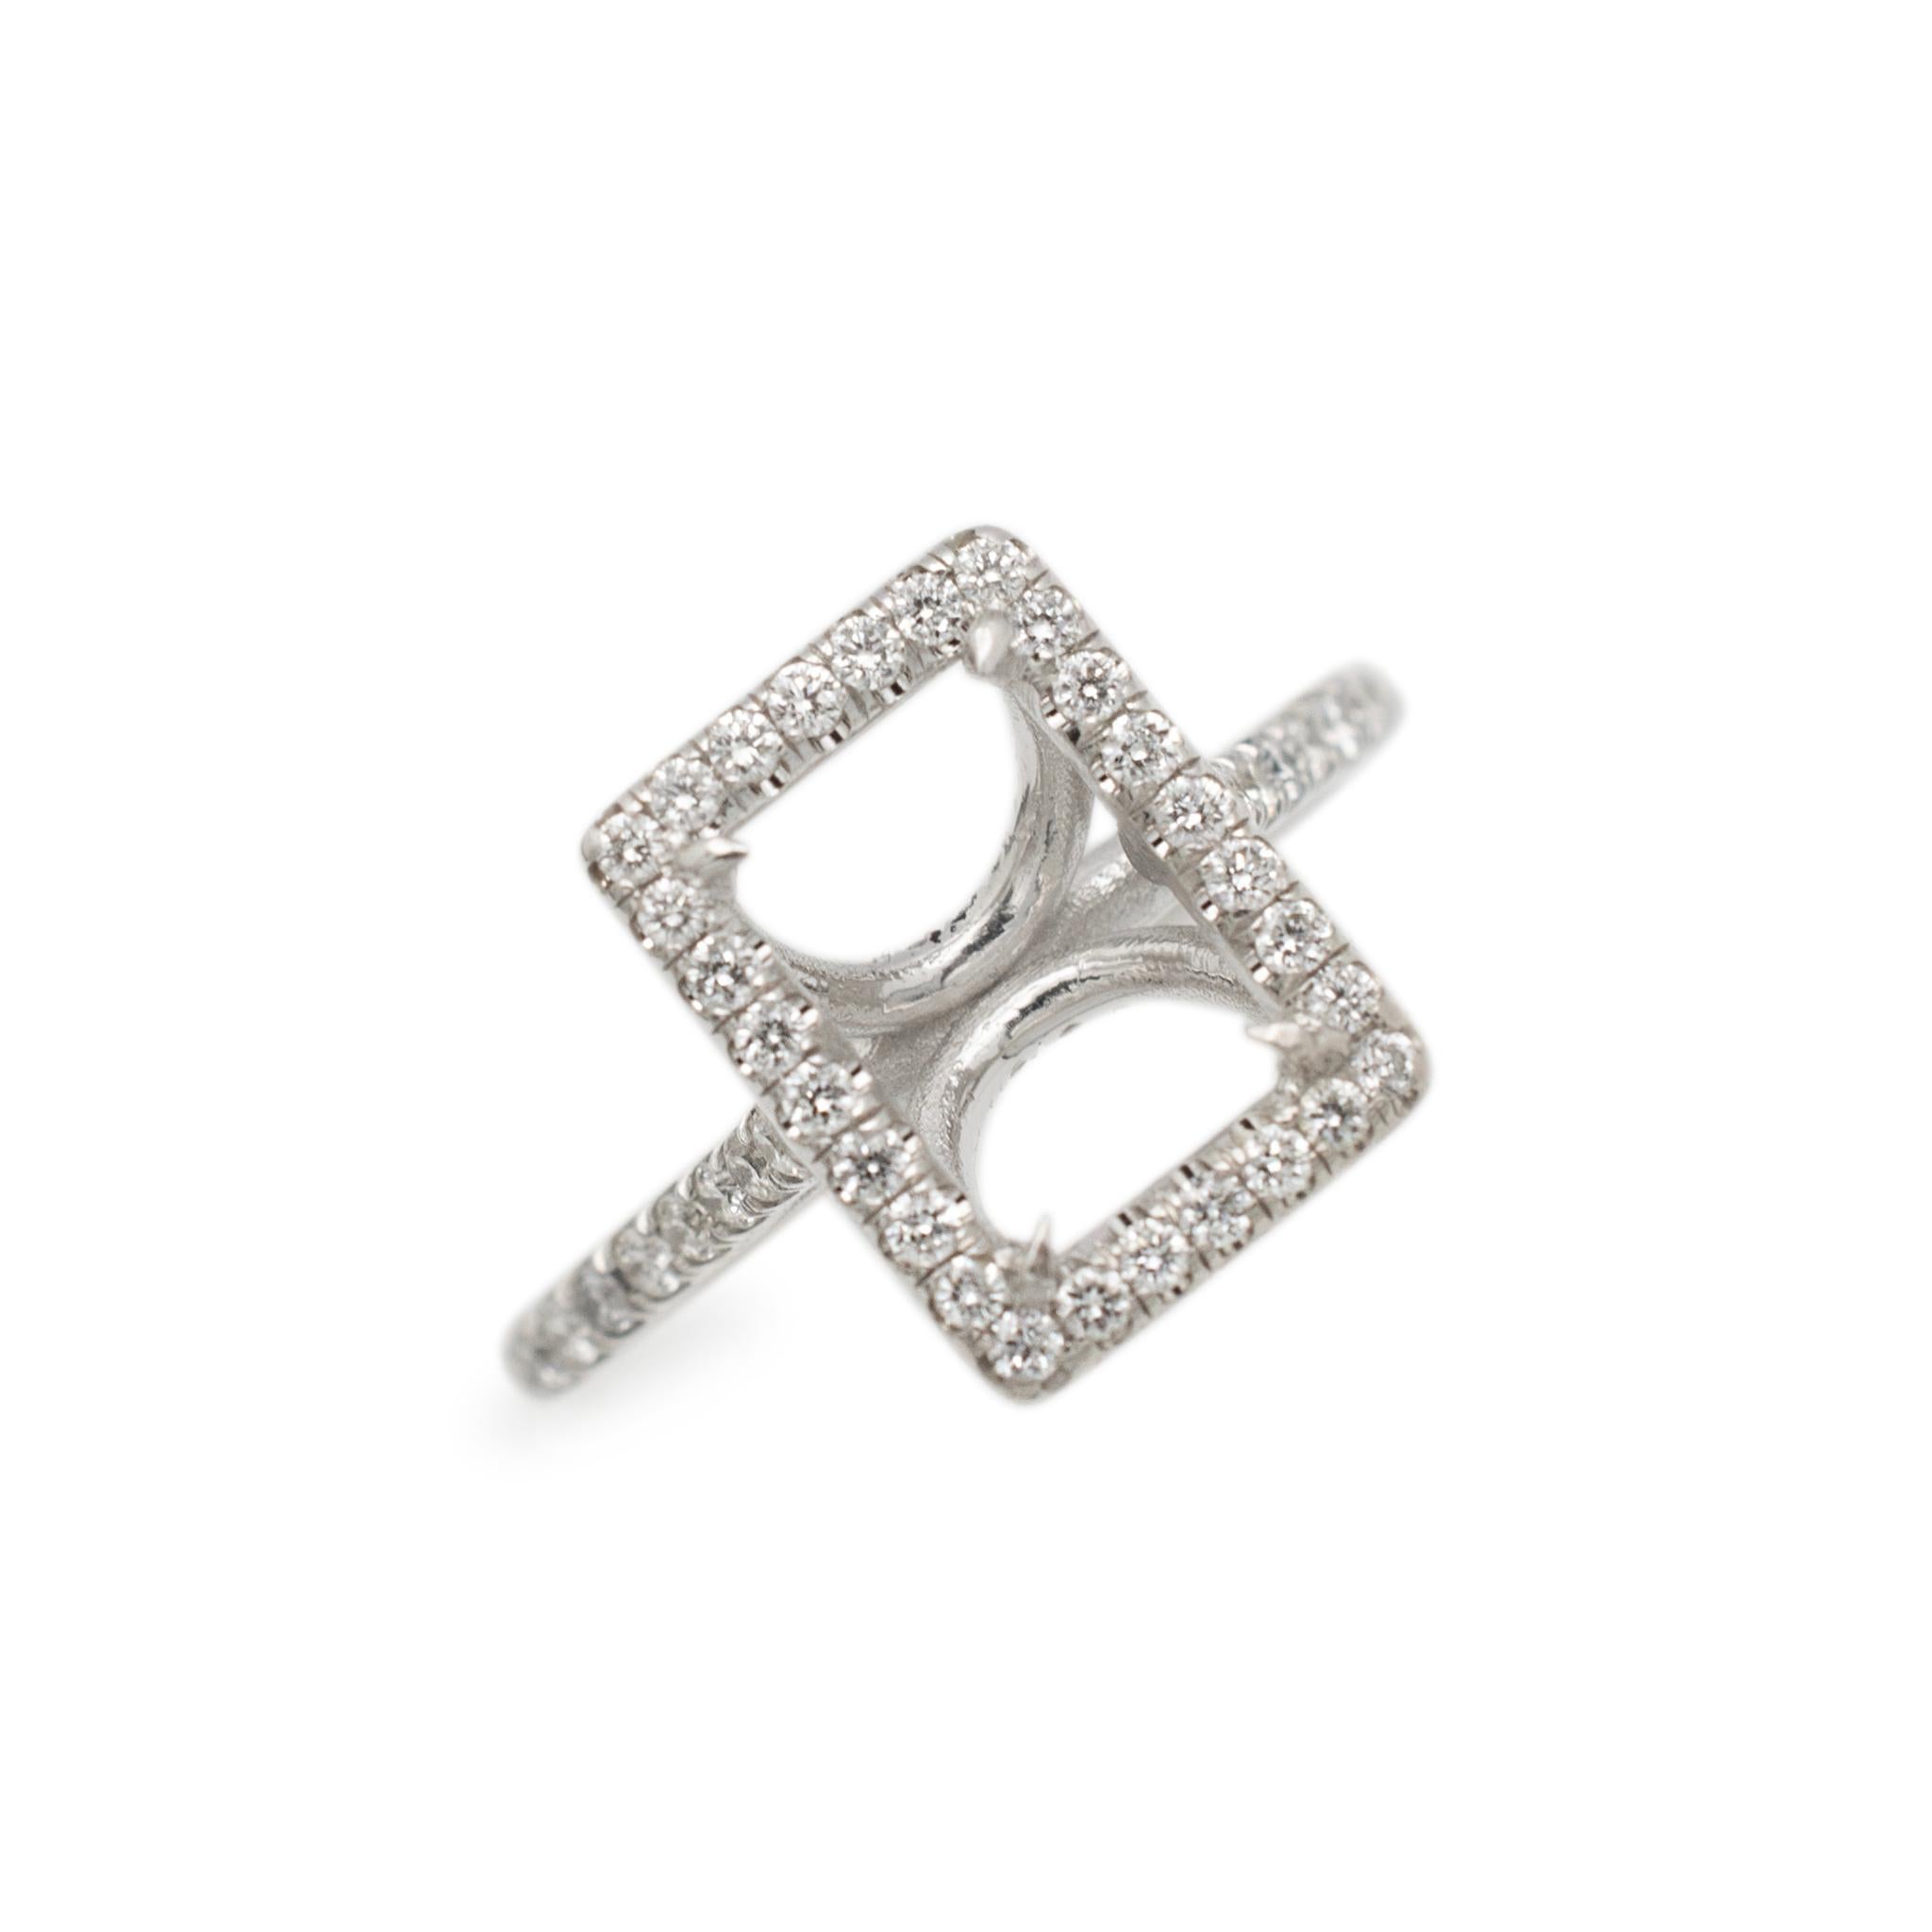 Gender: Ladies

Metal Type: 14K White Gold

Size: 4.75

The semi-mount can accommodate a rectangular stone measuring between 8.90mm to 9.10mm in length by 6.40mm to 6.60mm in width.

Head measurements: 11.70mm x 9.00mm

Shank maximum width: